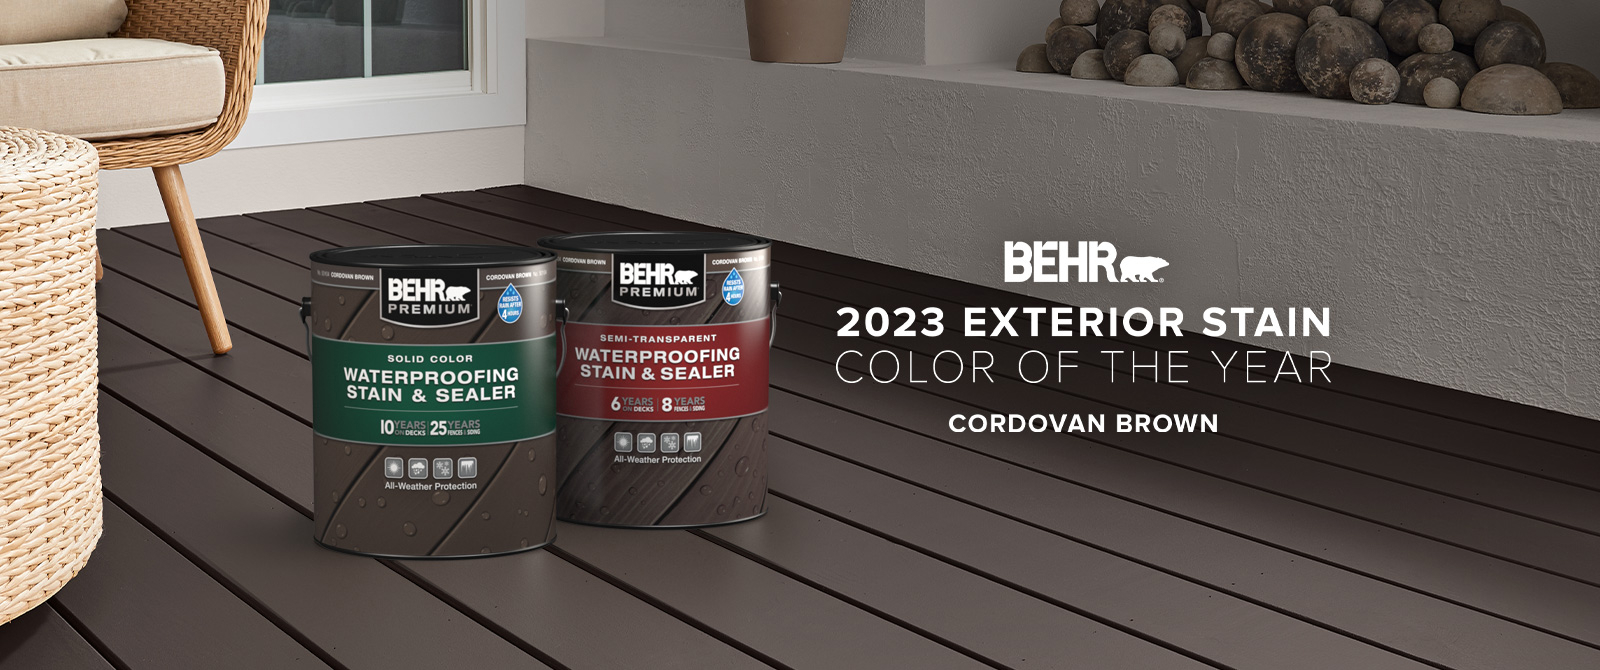 2023 Exterior Stain Color of the Year - Cordovan Brown